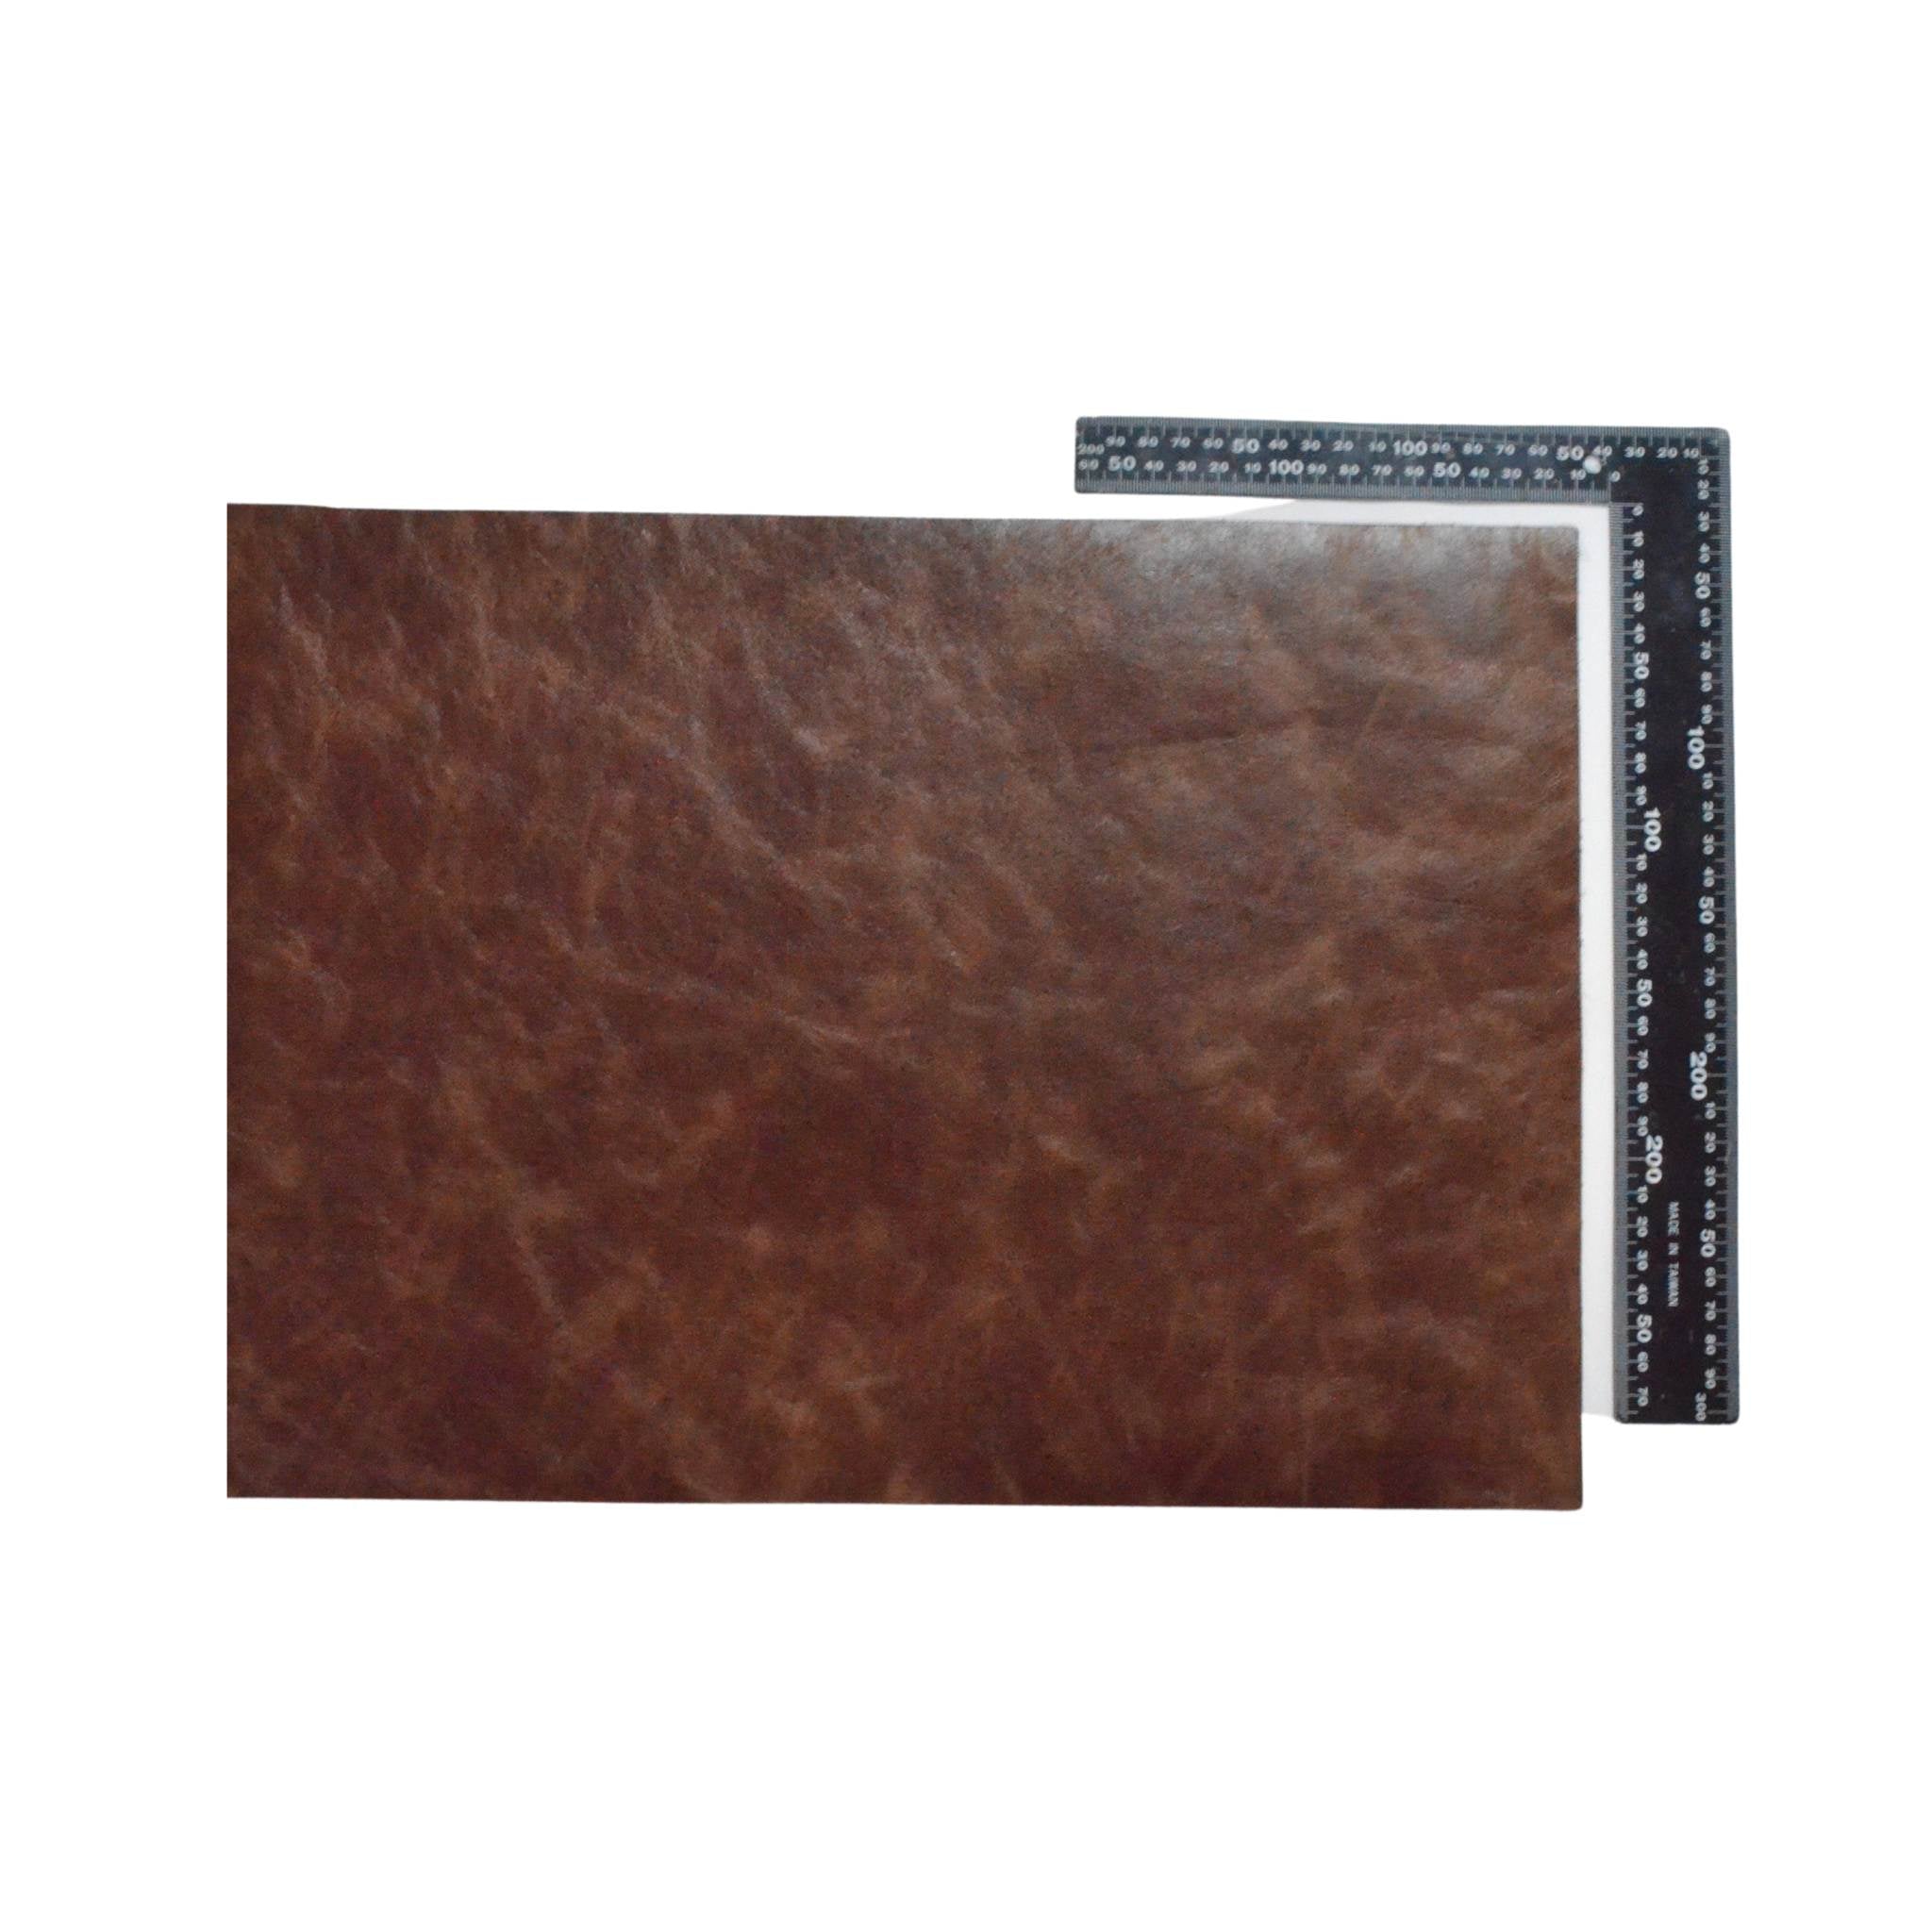 An excellent qualtiy eco-tannage cowhide leather in vintage brown . This leather is very durable and has a soft feel. Sold in A3, ideal for making pouches, zipped travel bags, wallets etc.